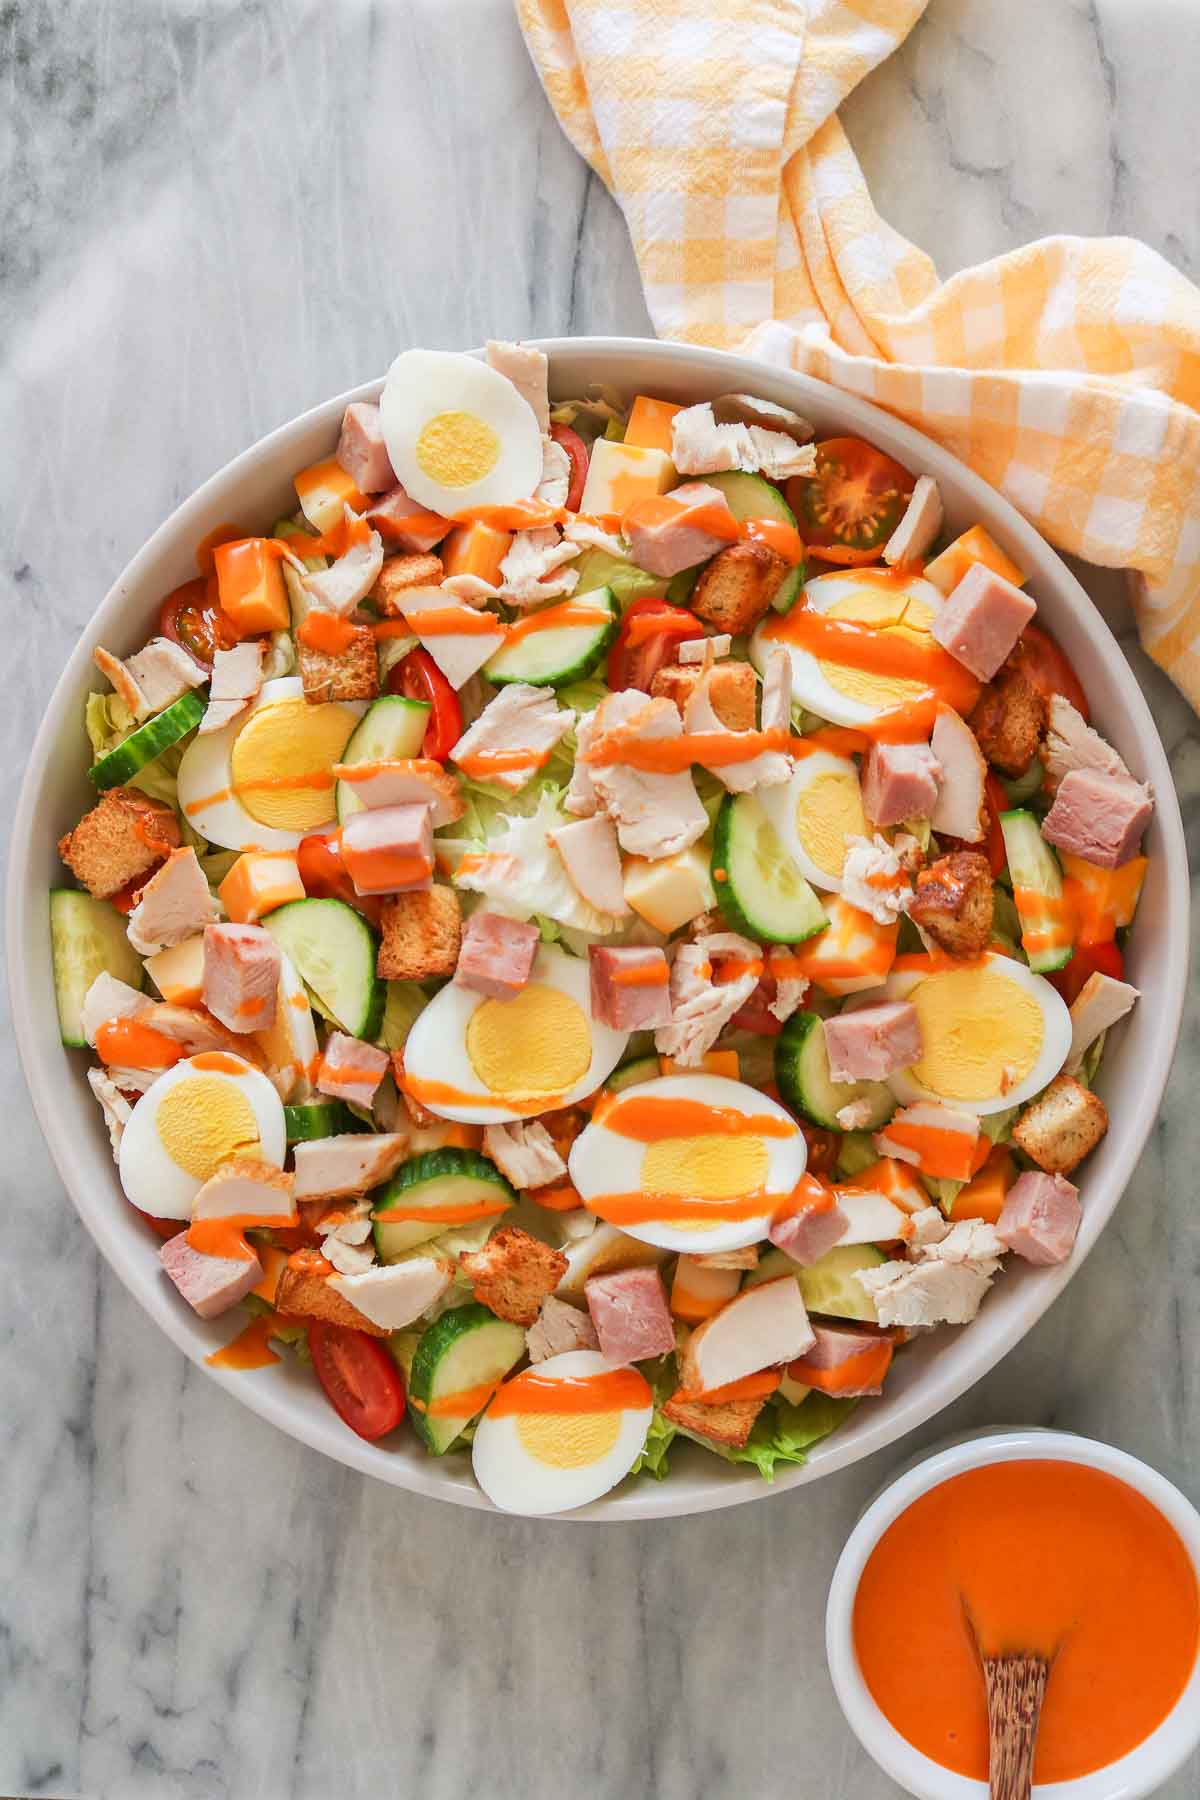 Large bowl of chef's salad with French dressing.